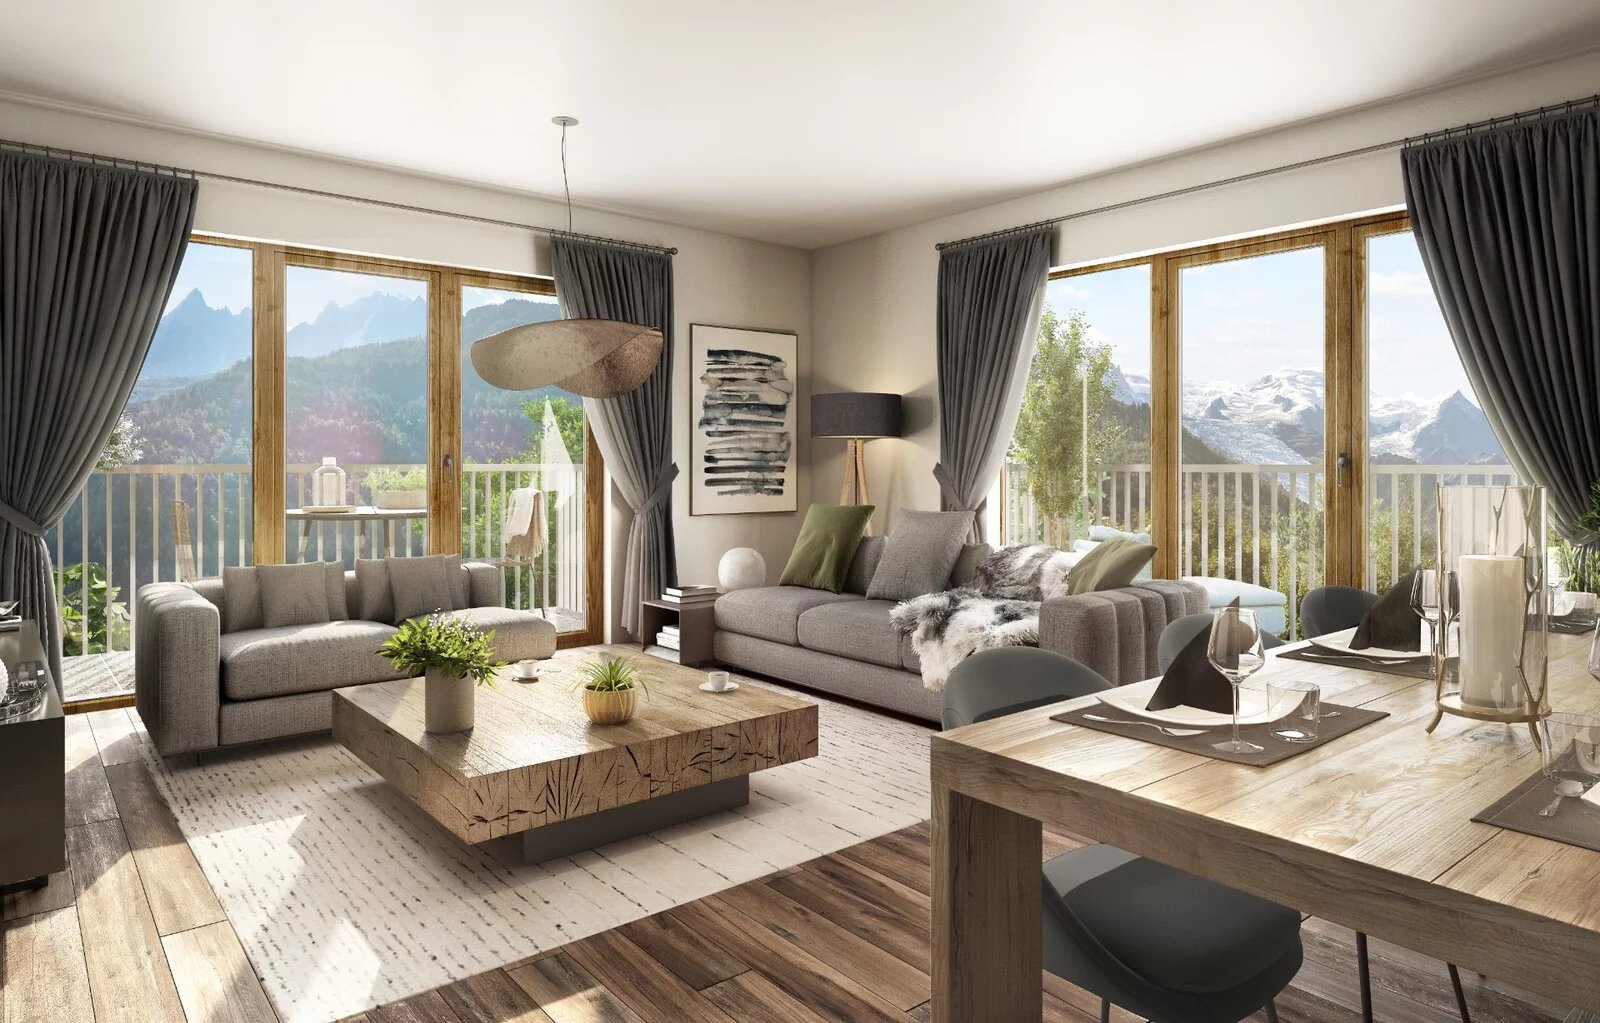 ONE BEDROOM APARTMENT WITH MOUNTAIN VIEW